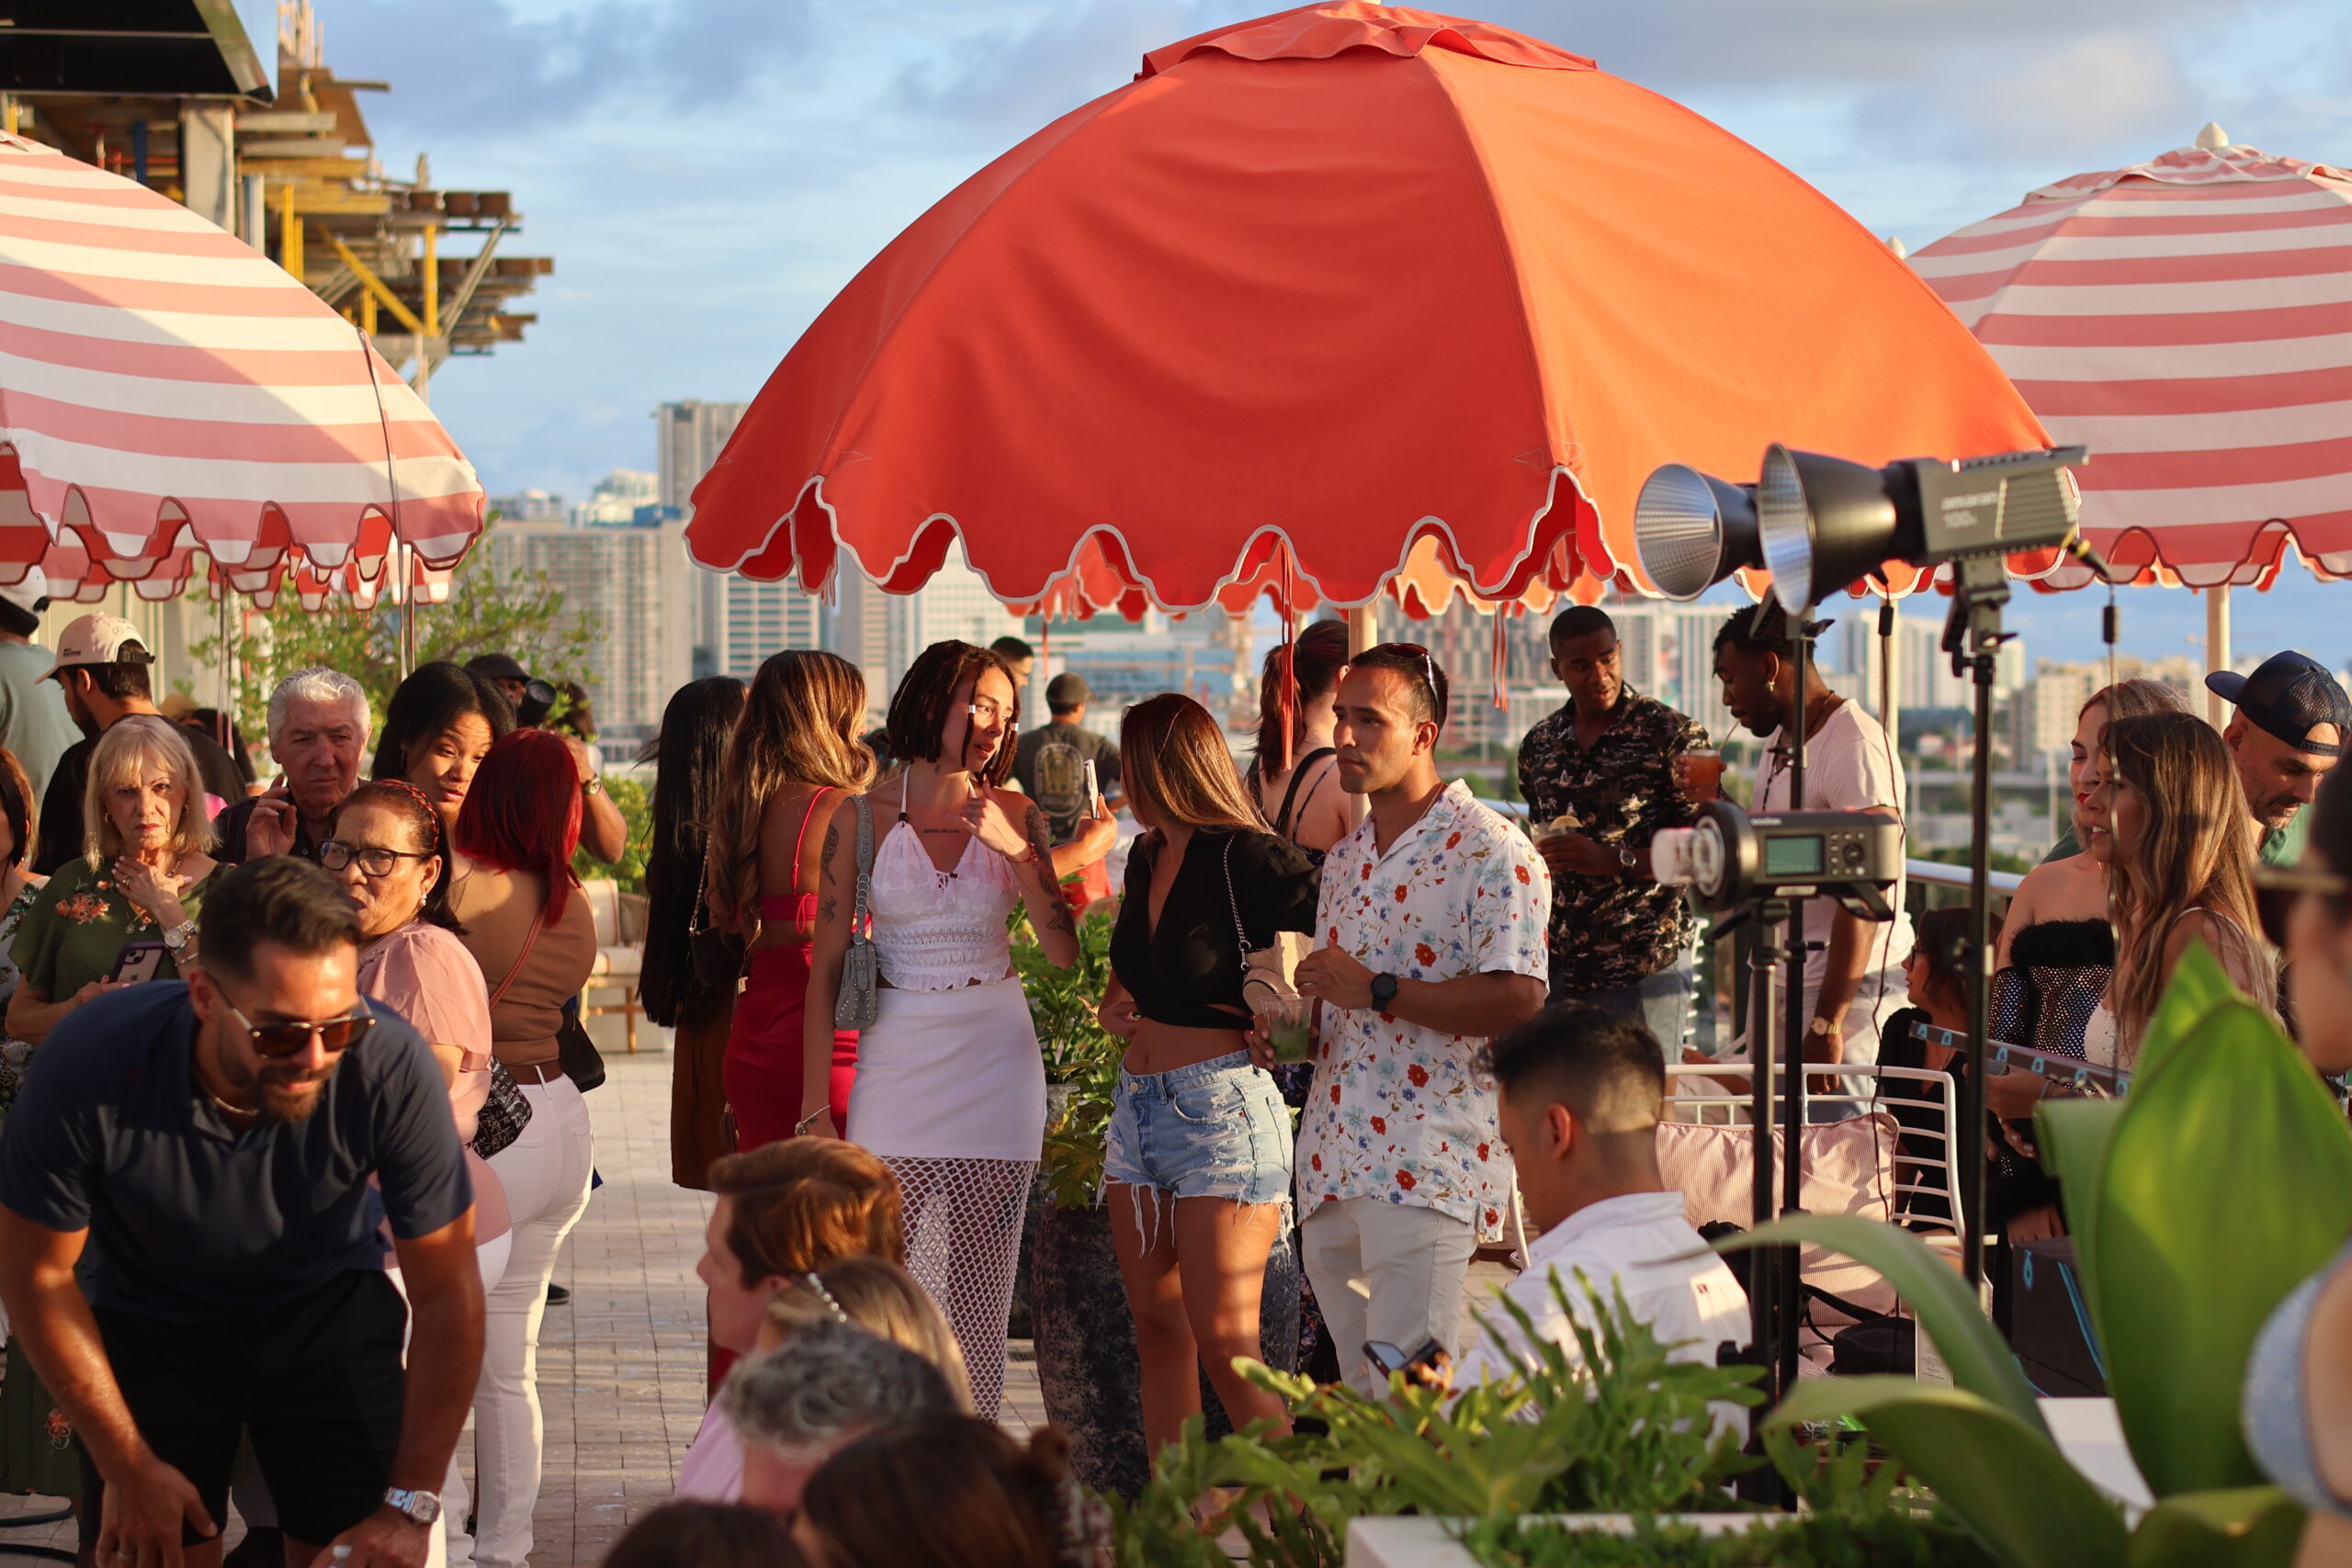 A rooftop gathering with people socializing under red and white umbrellas, set against a city skyline background.